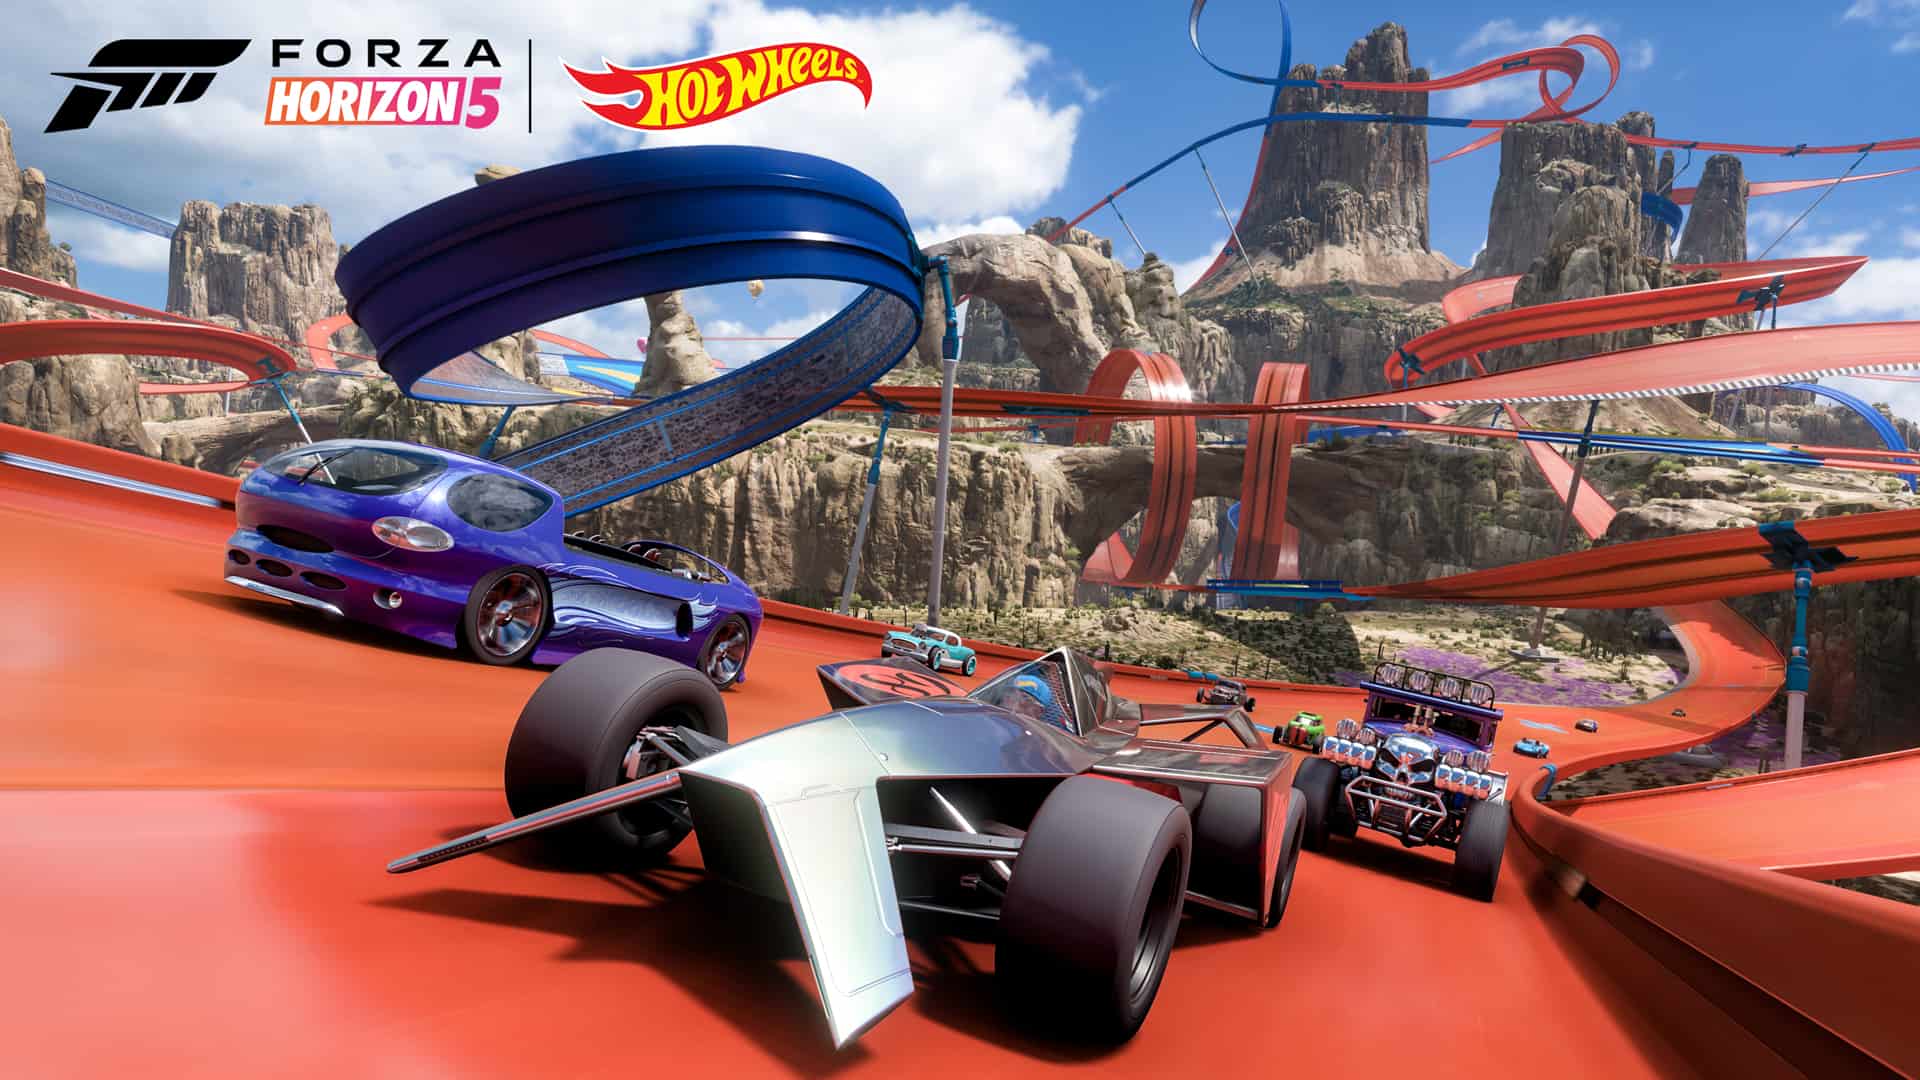 Forza Horizon 5's Hot Wheels expansion launches July, includes new area and story